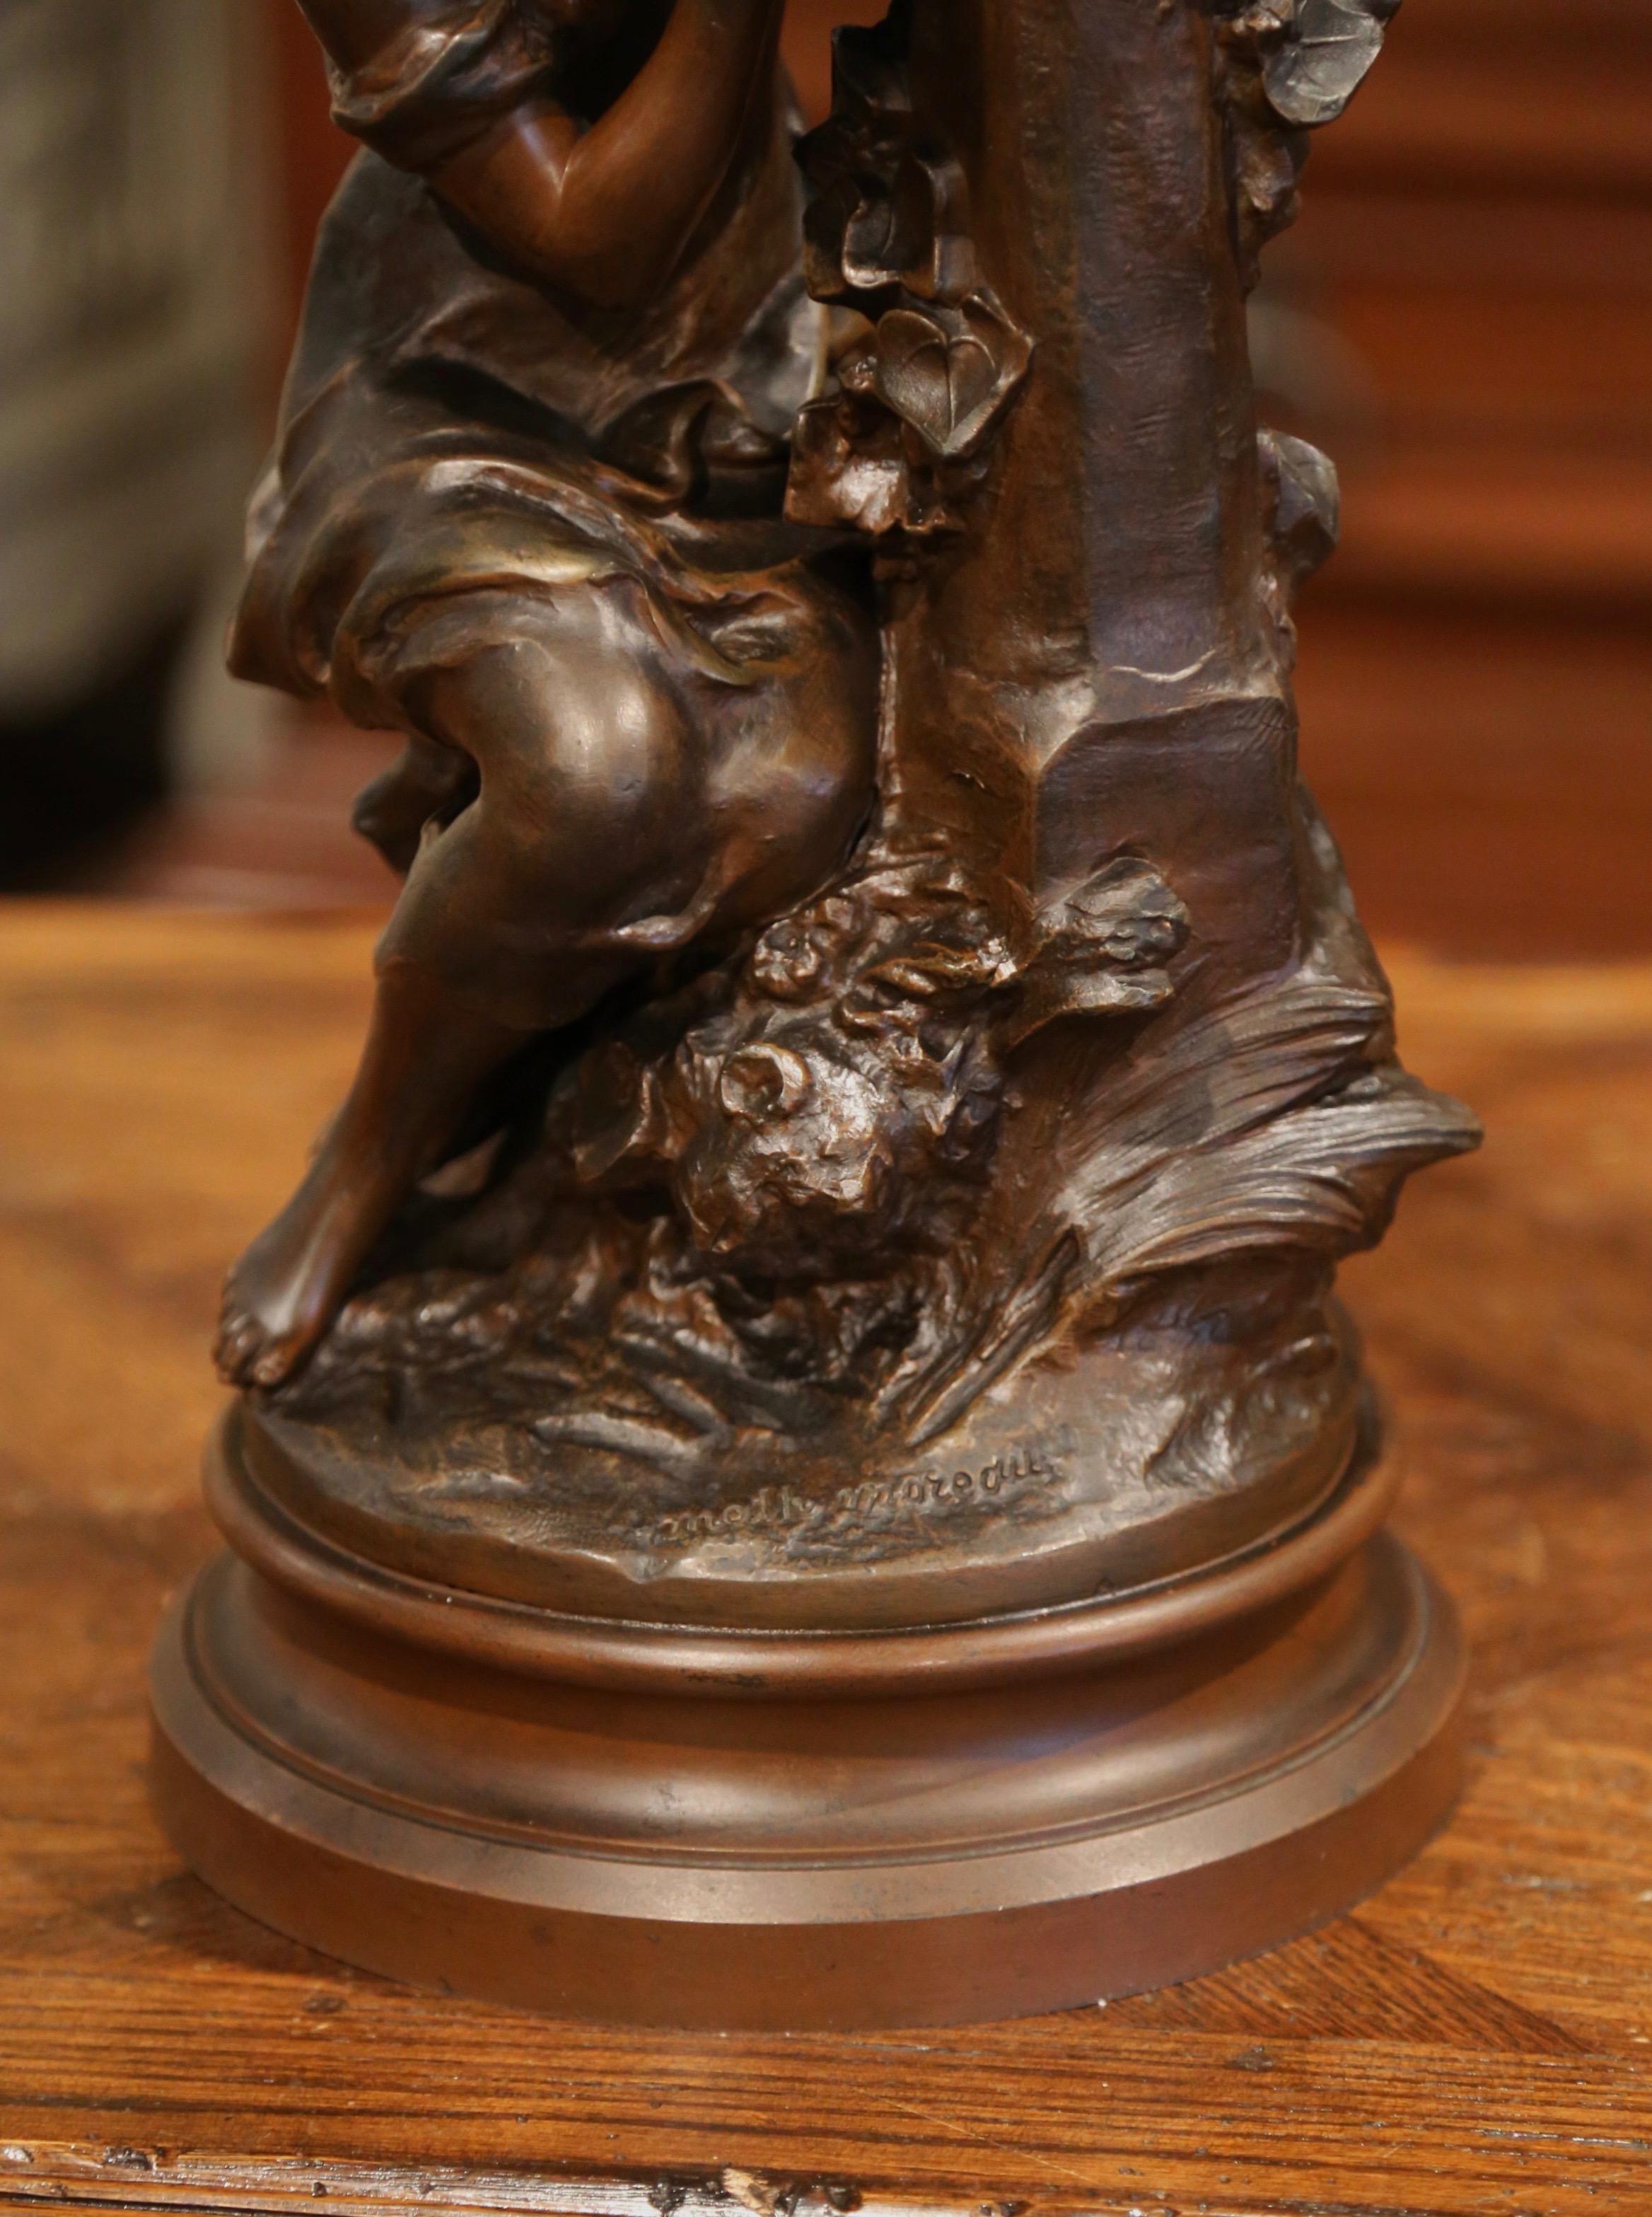 Hand-Crafted 19th Century French Patinated Spelter Sculpture Signed Mathurin Moreau